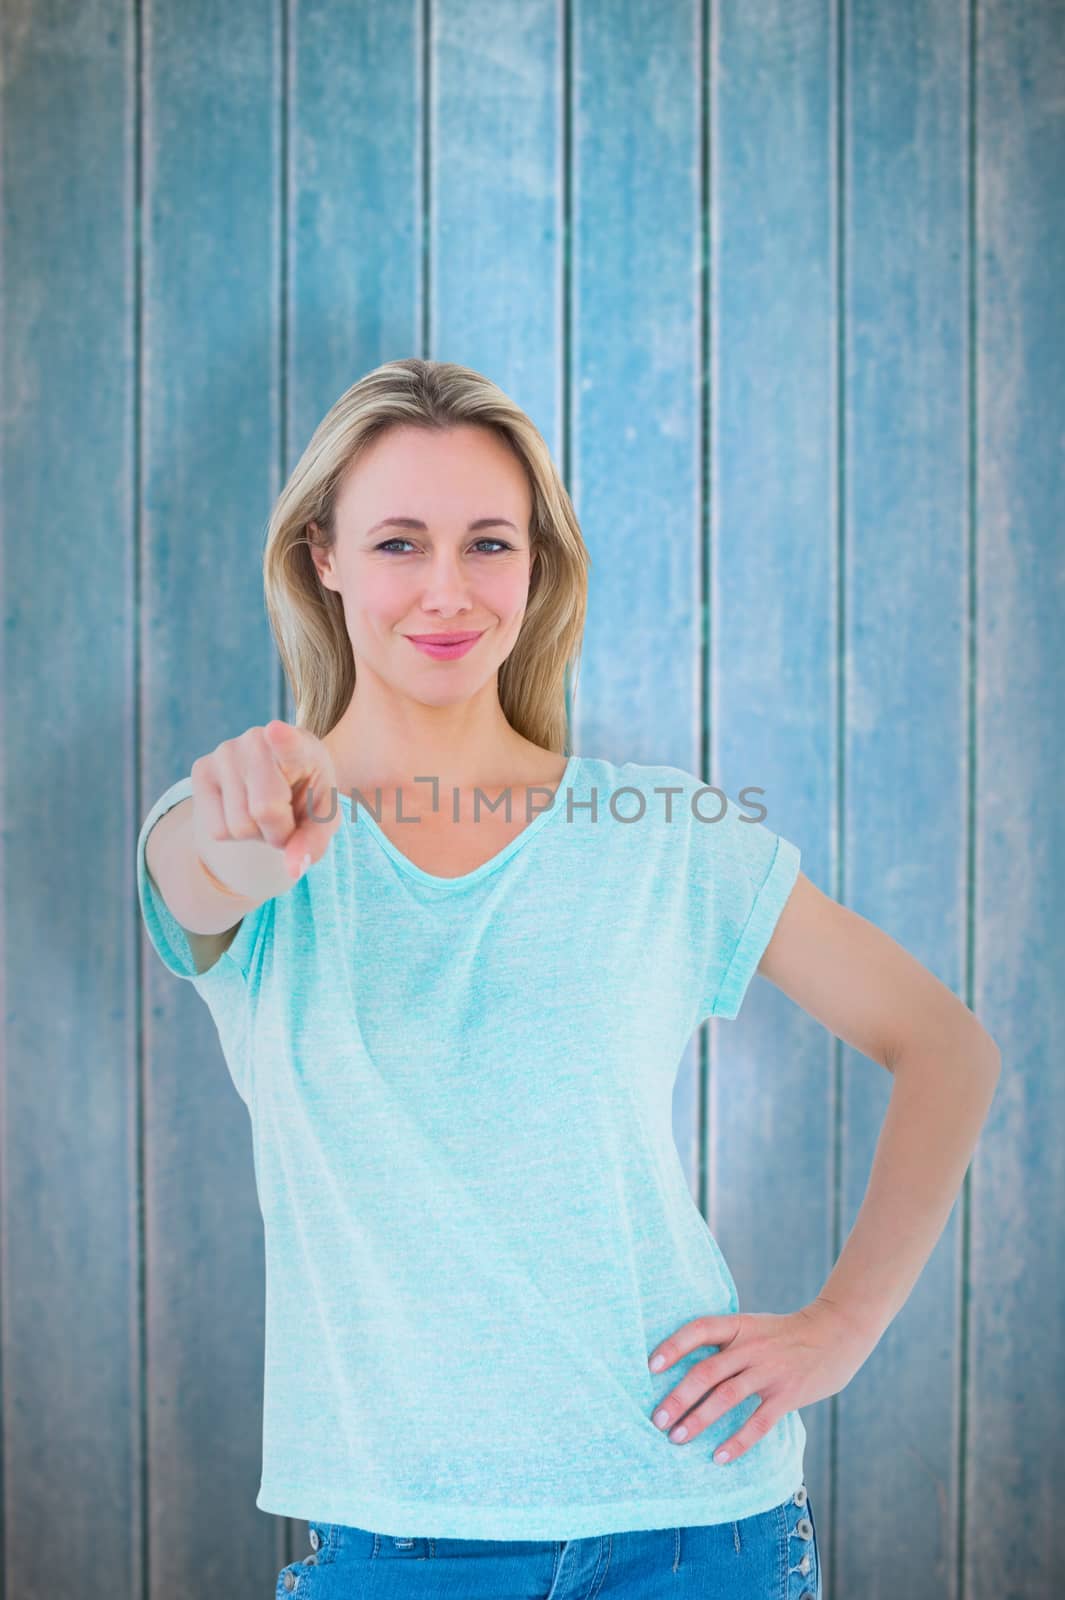 Smiling blonde standing and pointing at camera against wooden planks